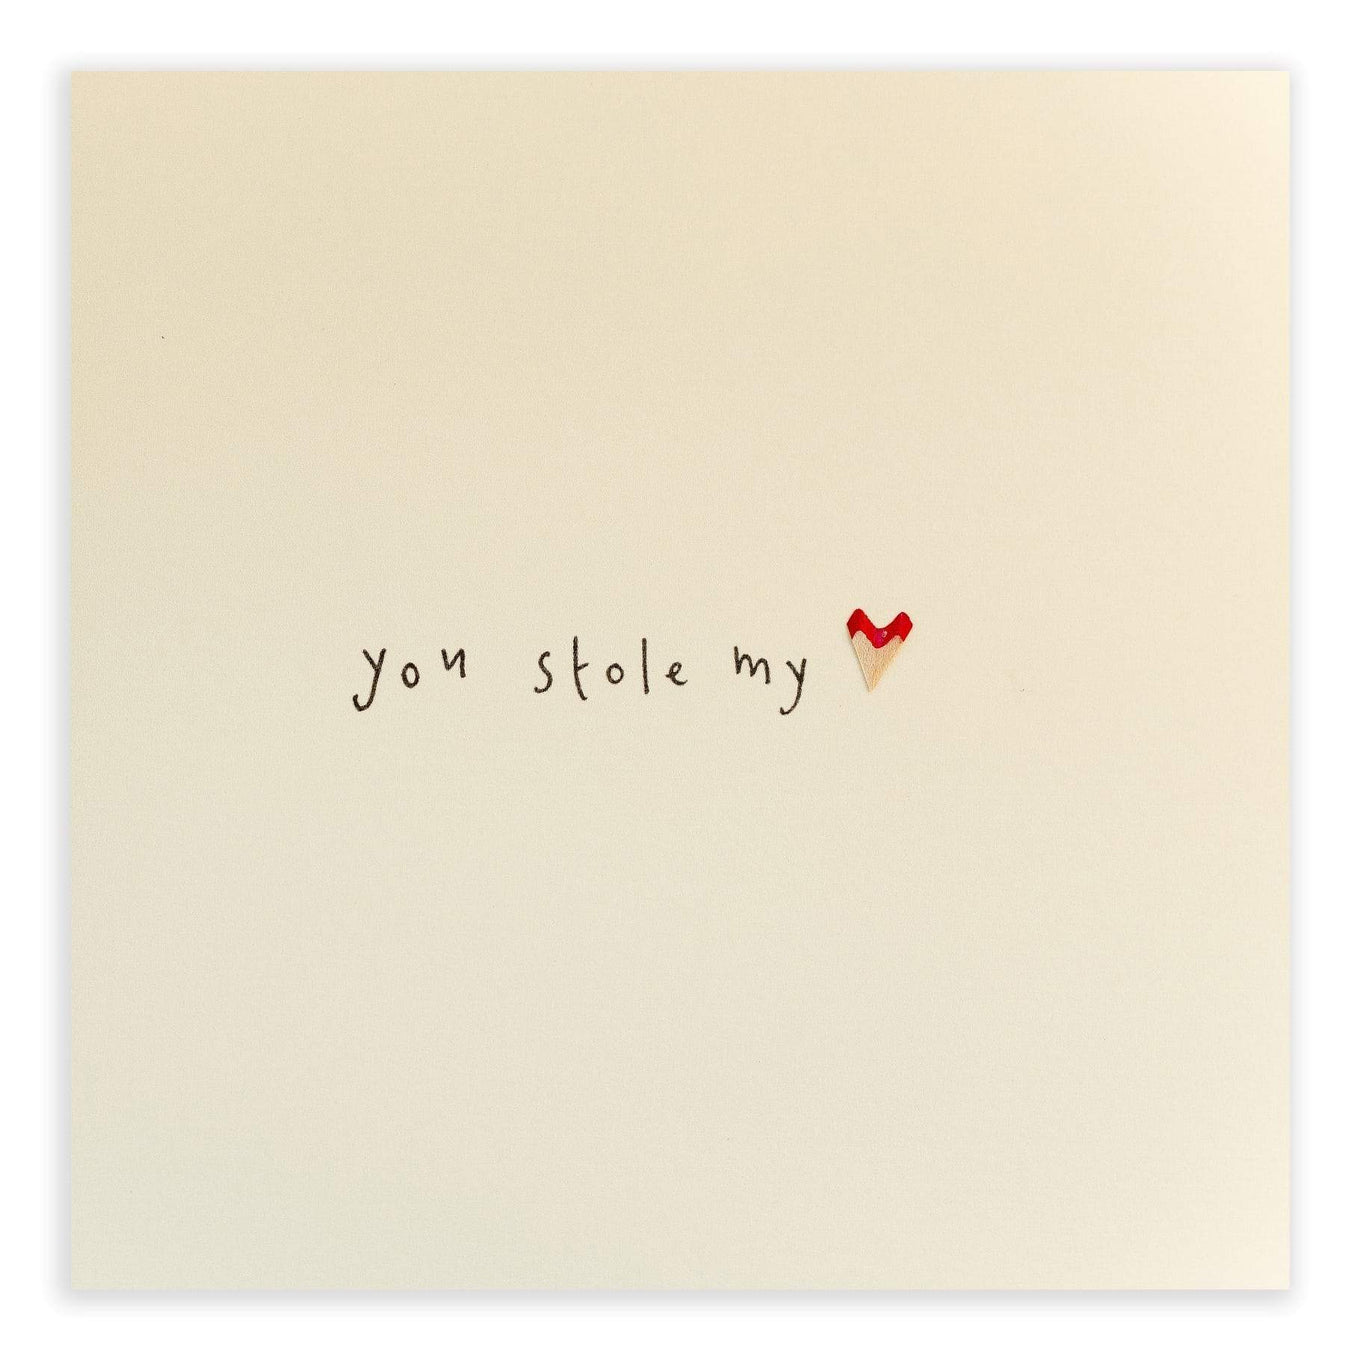 Card reads, "You Stole My" followed by a heart made of a red pencil shaving. 